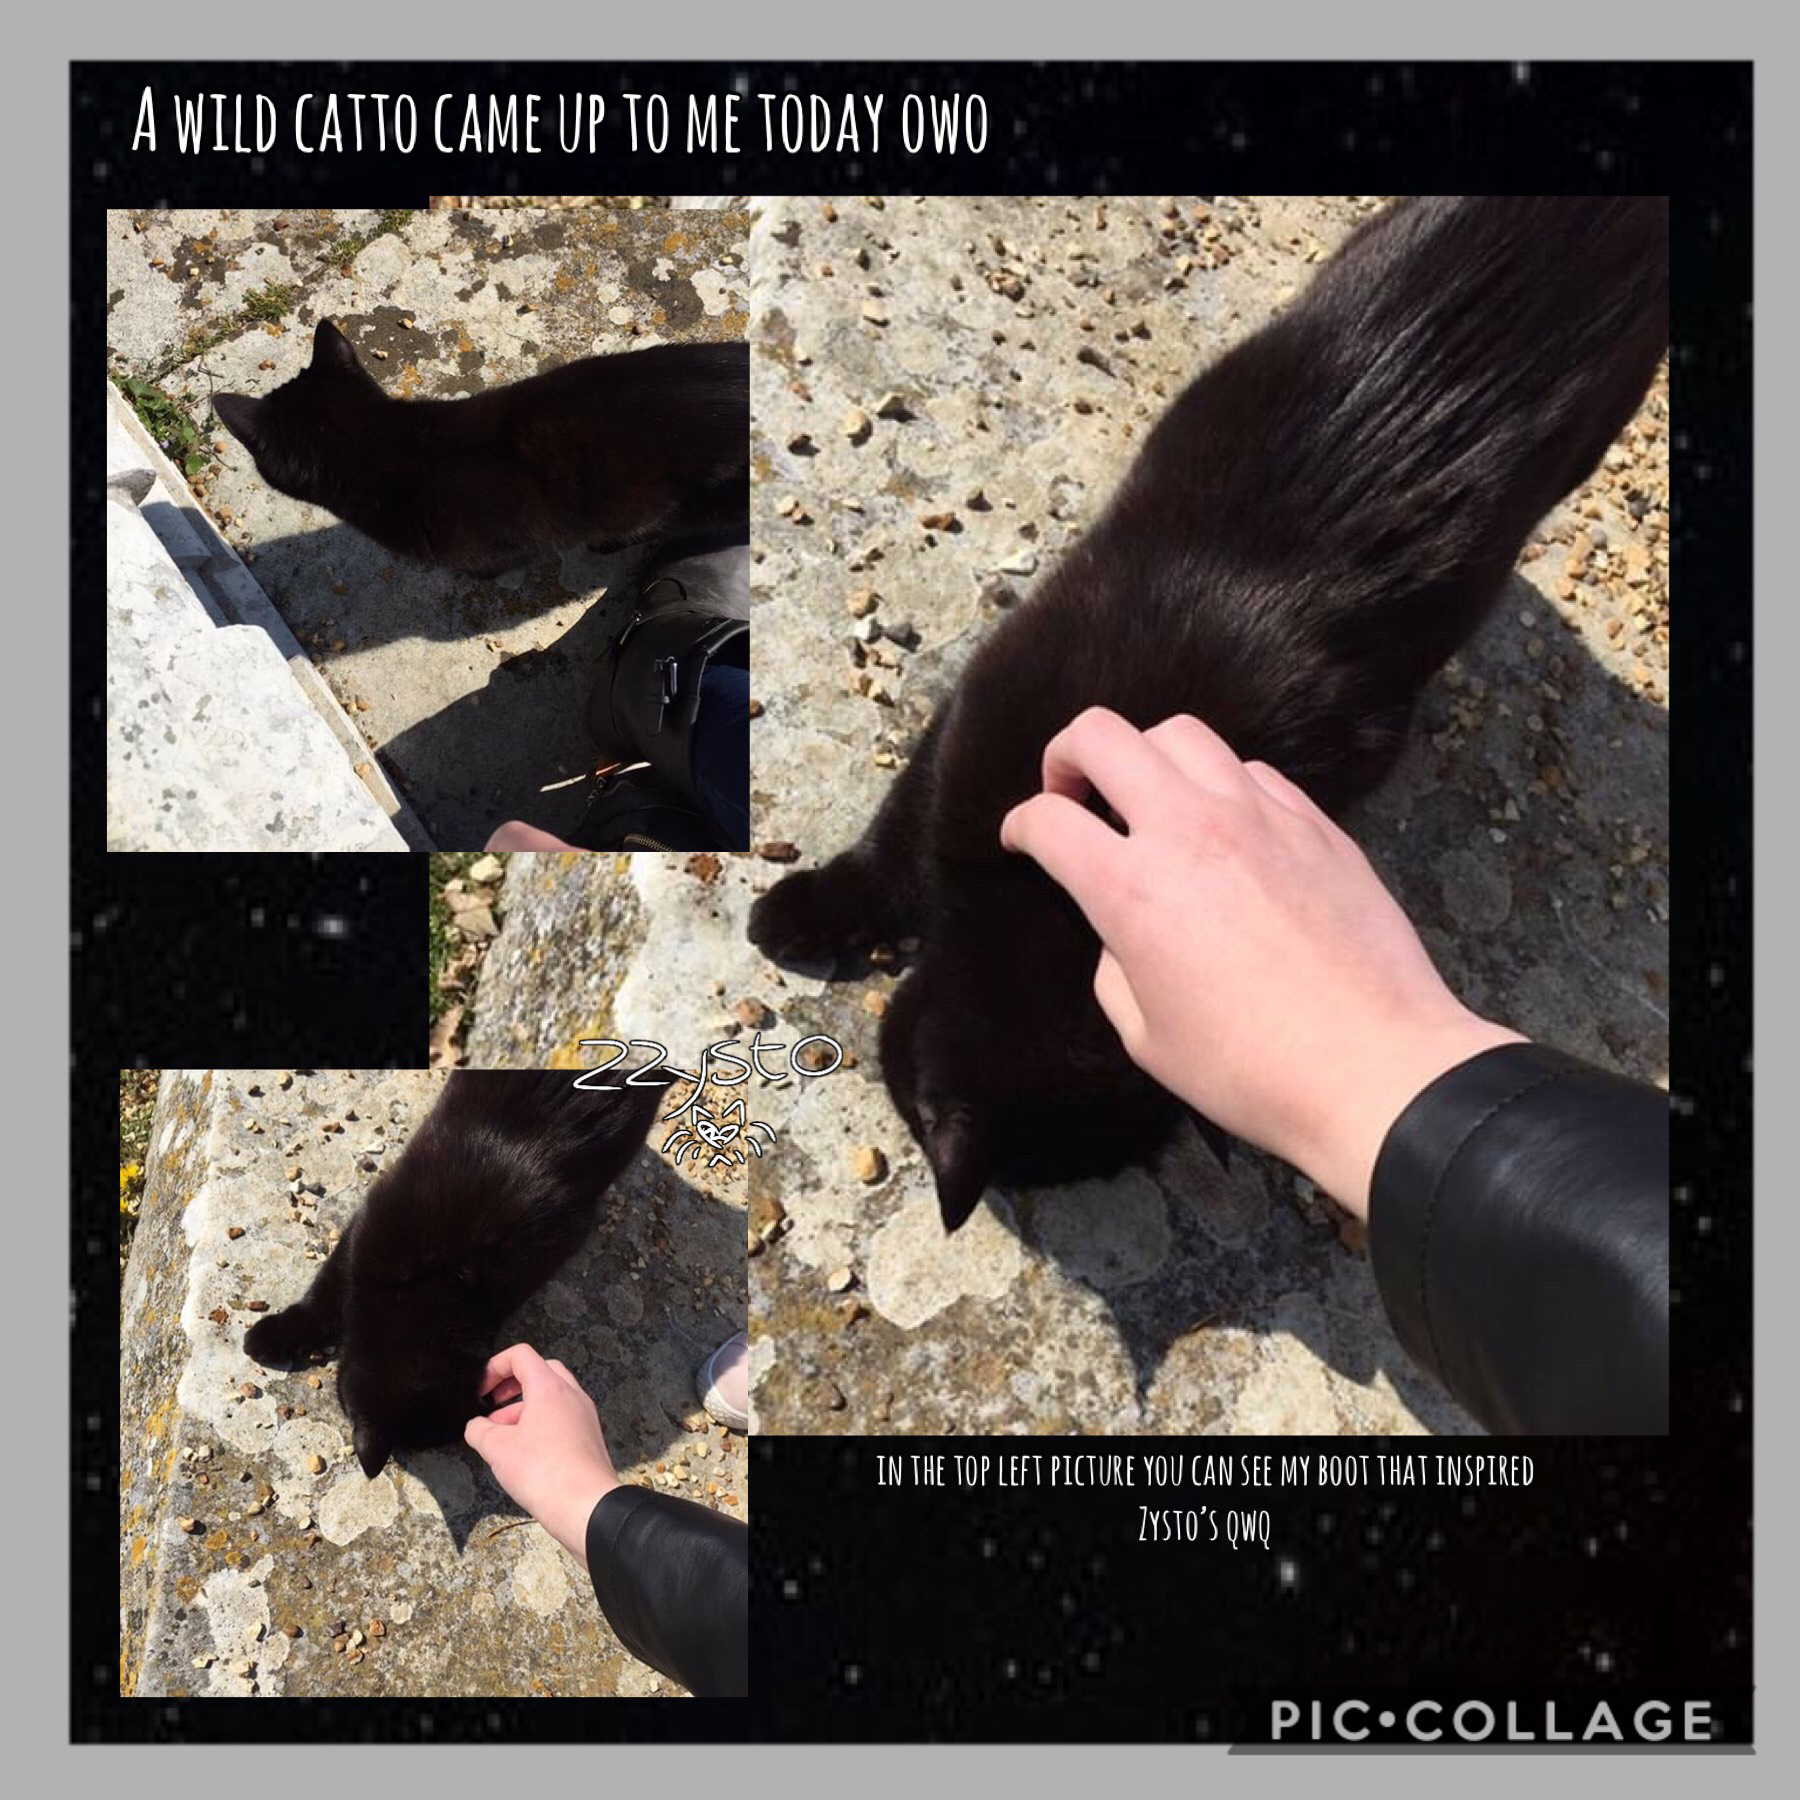 🐈Tap🐈
Apparently he lives on the grounds of where I went and looked well fed. He was also super soft! My sister and mum refused to pet him because he had a tick, but he’s a wild cat so it’d be expected.
The gardens at this place where really nice tho uwu